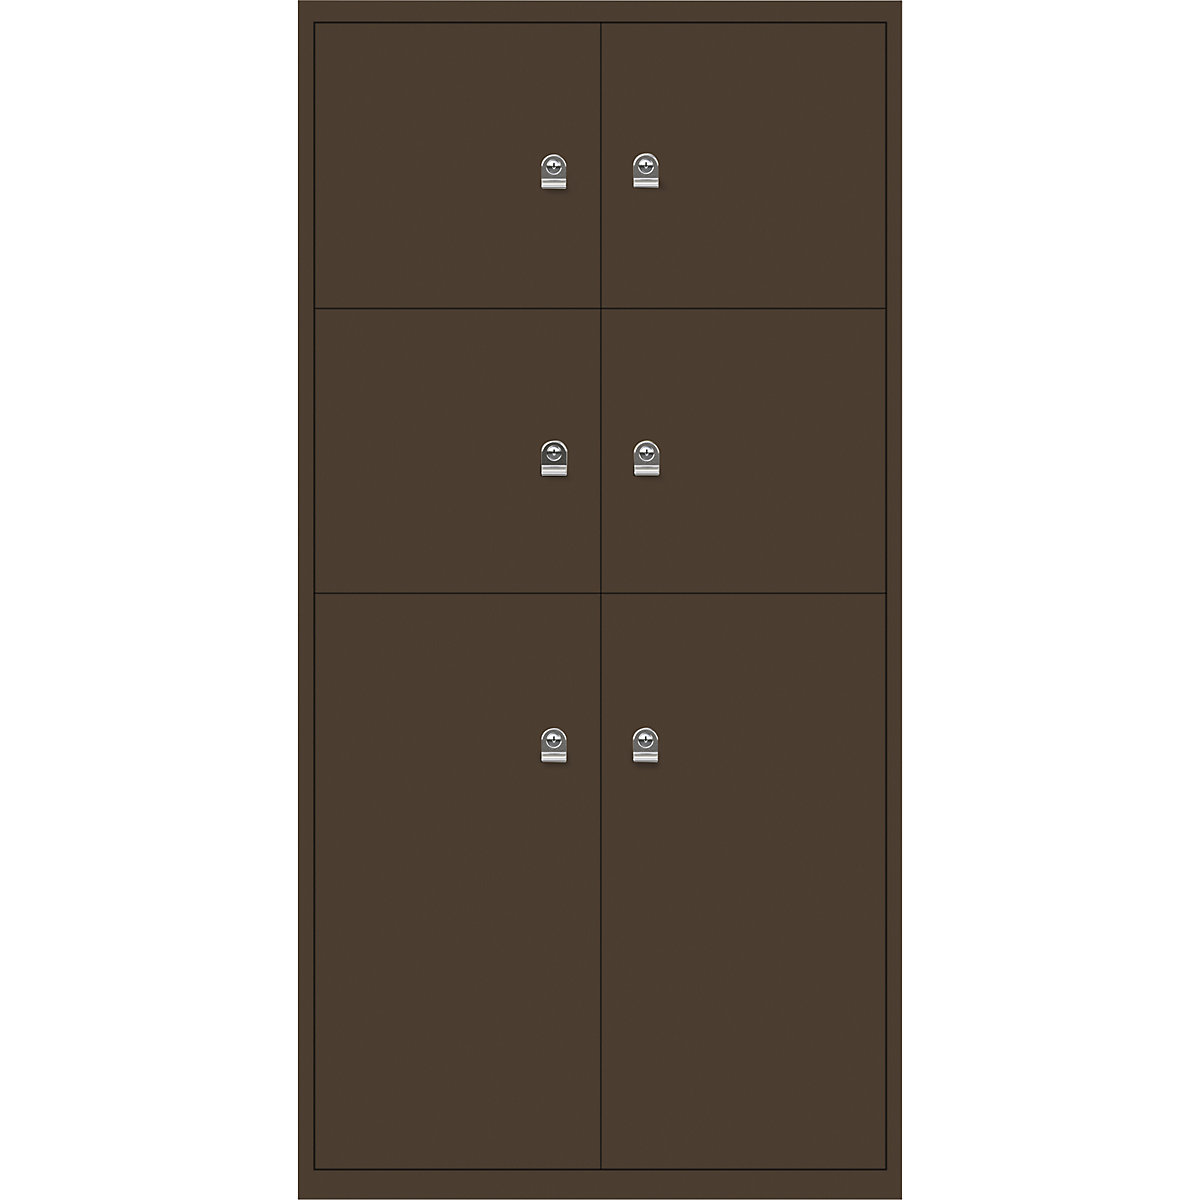 LateralFile™ lodge – BISLEY, with 6 lockable compartments, height 4 x 375 mm, 2 x 755 mm, coffee-15